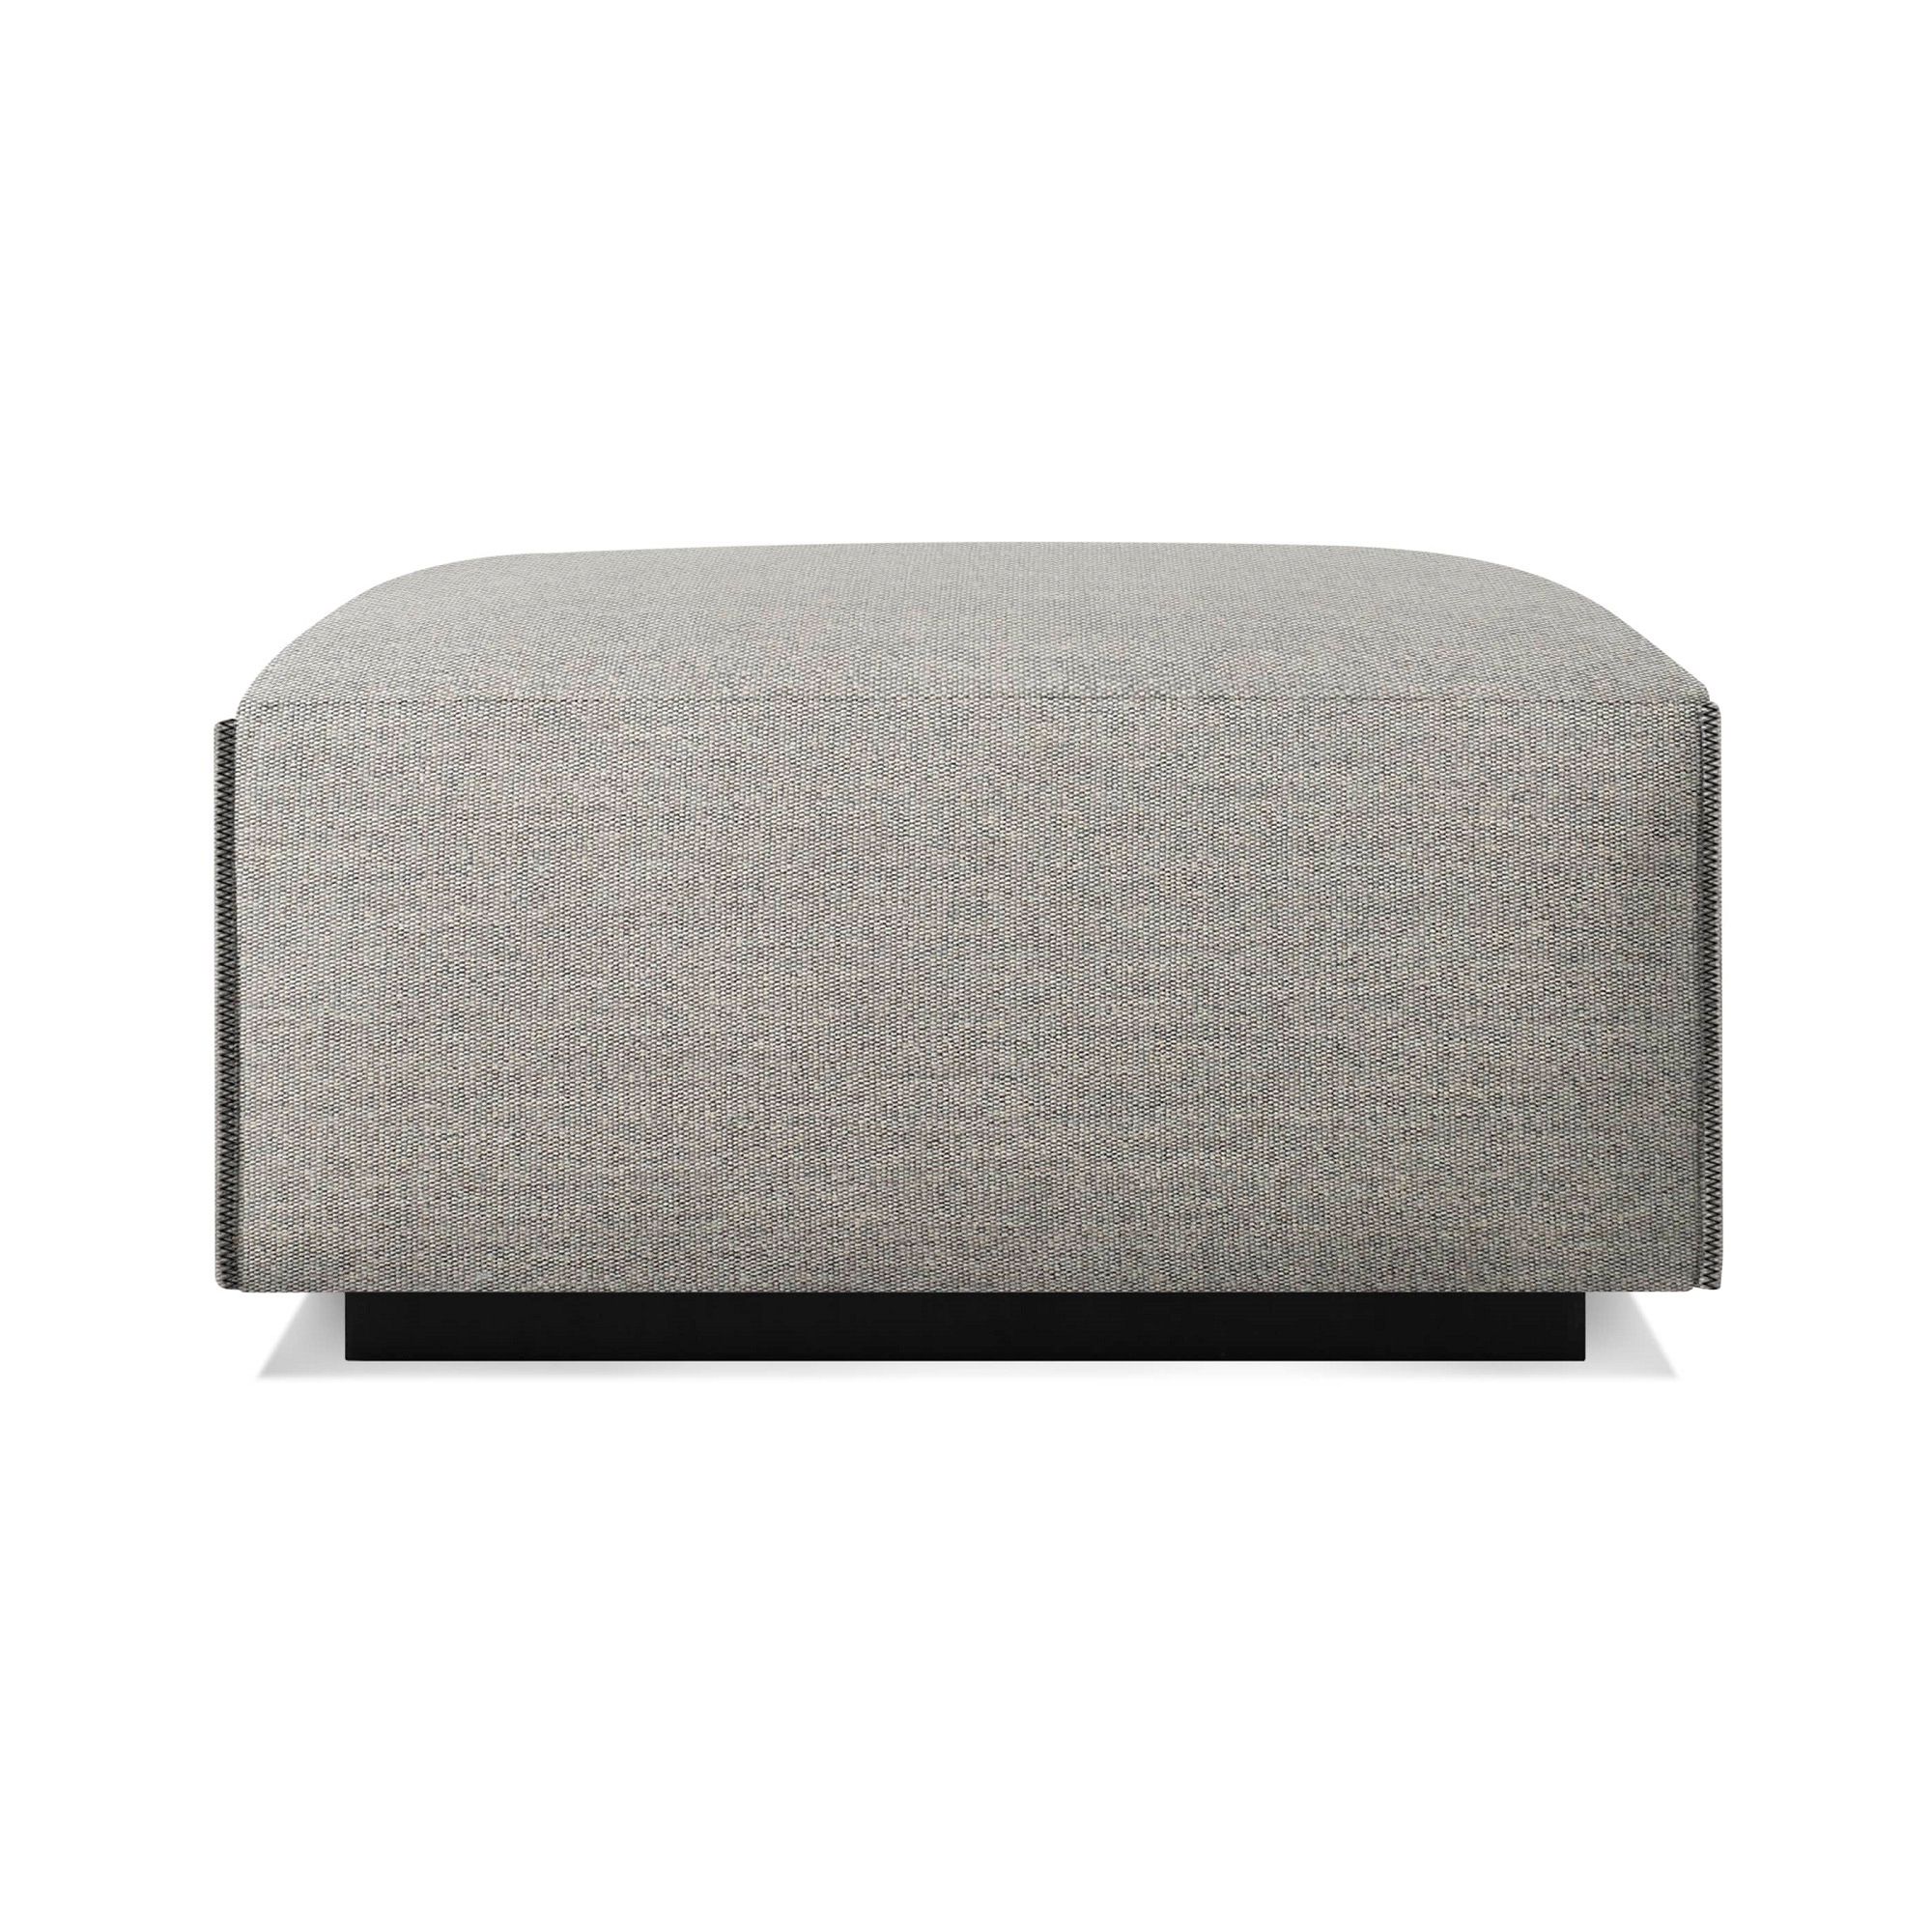 Well Known Blu Dot Cleon Ottoman Inside Charcoal Dot Ottomans (View 1 of 10)